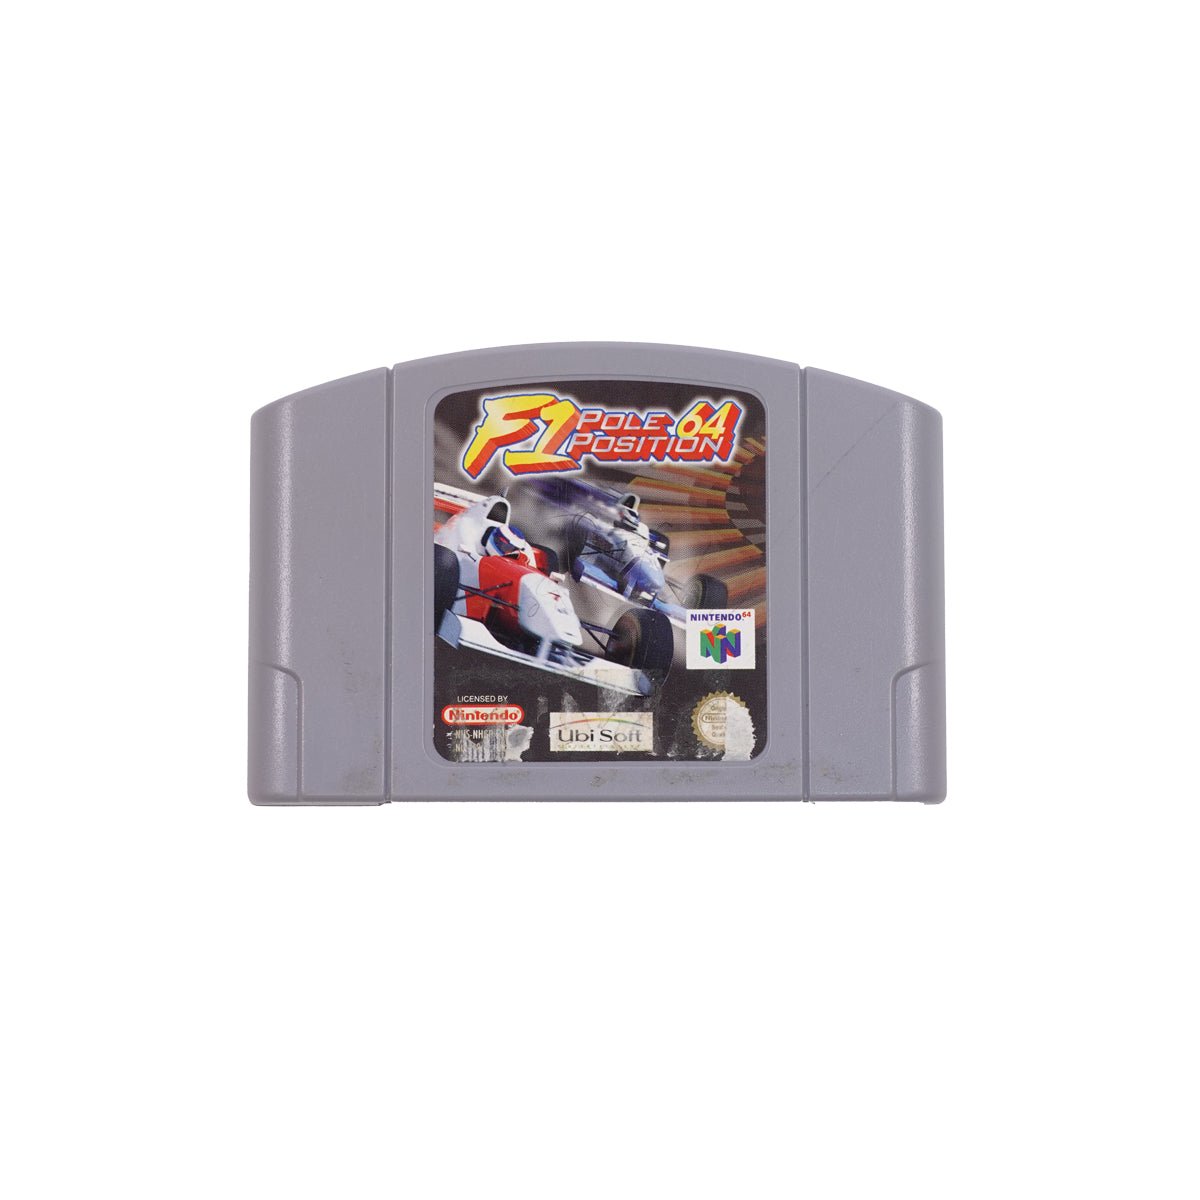 (Pre-Owned) F1 Pole Position Video Game For Nintendo 64 - ريترو - Store 974 | ستور ٩٧٤